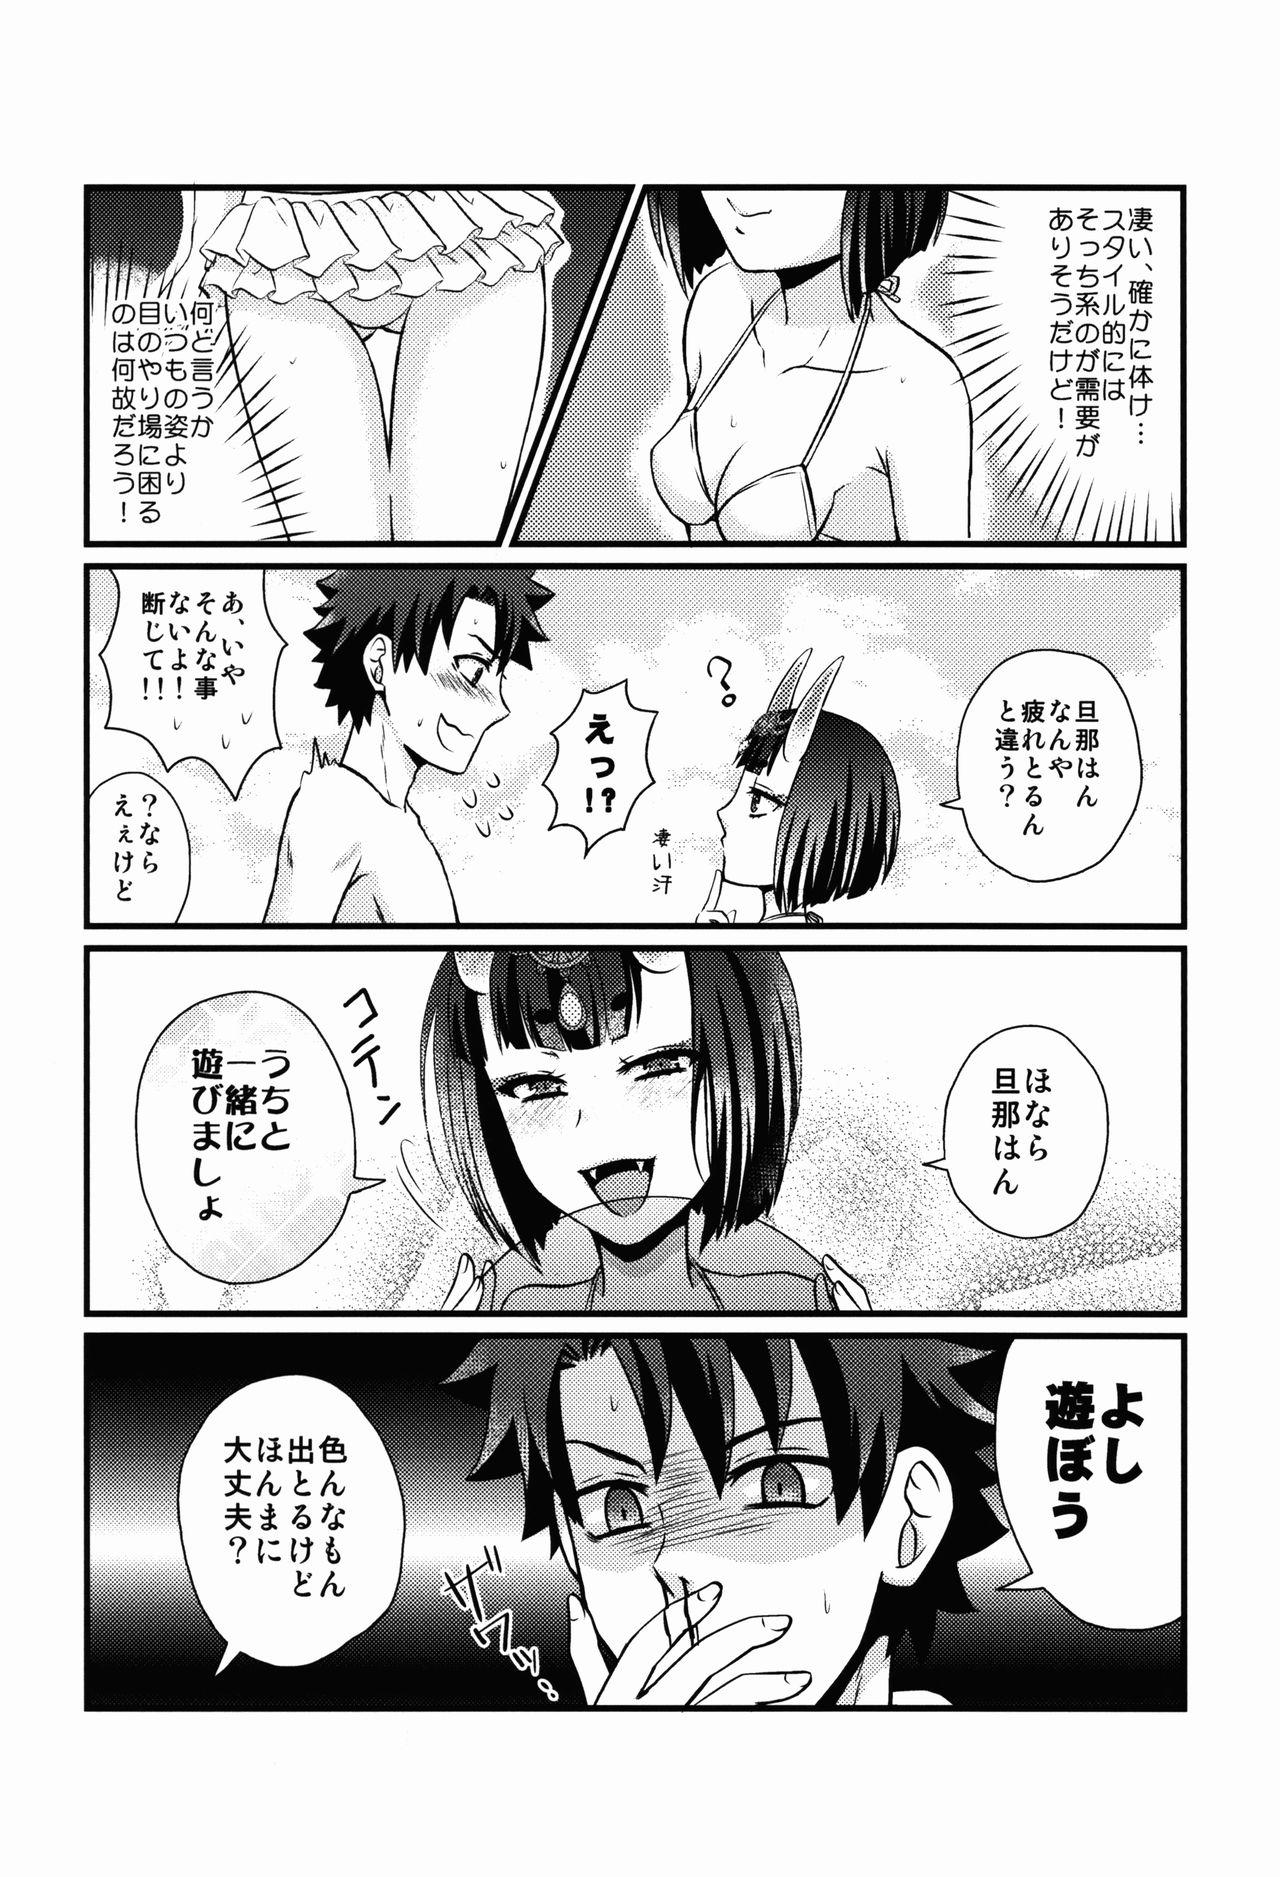 Hot Girl COMET:10 - Fate grand order Reverse Cowgirl - Page 6